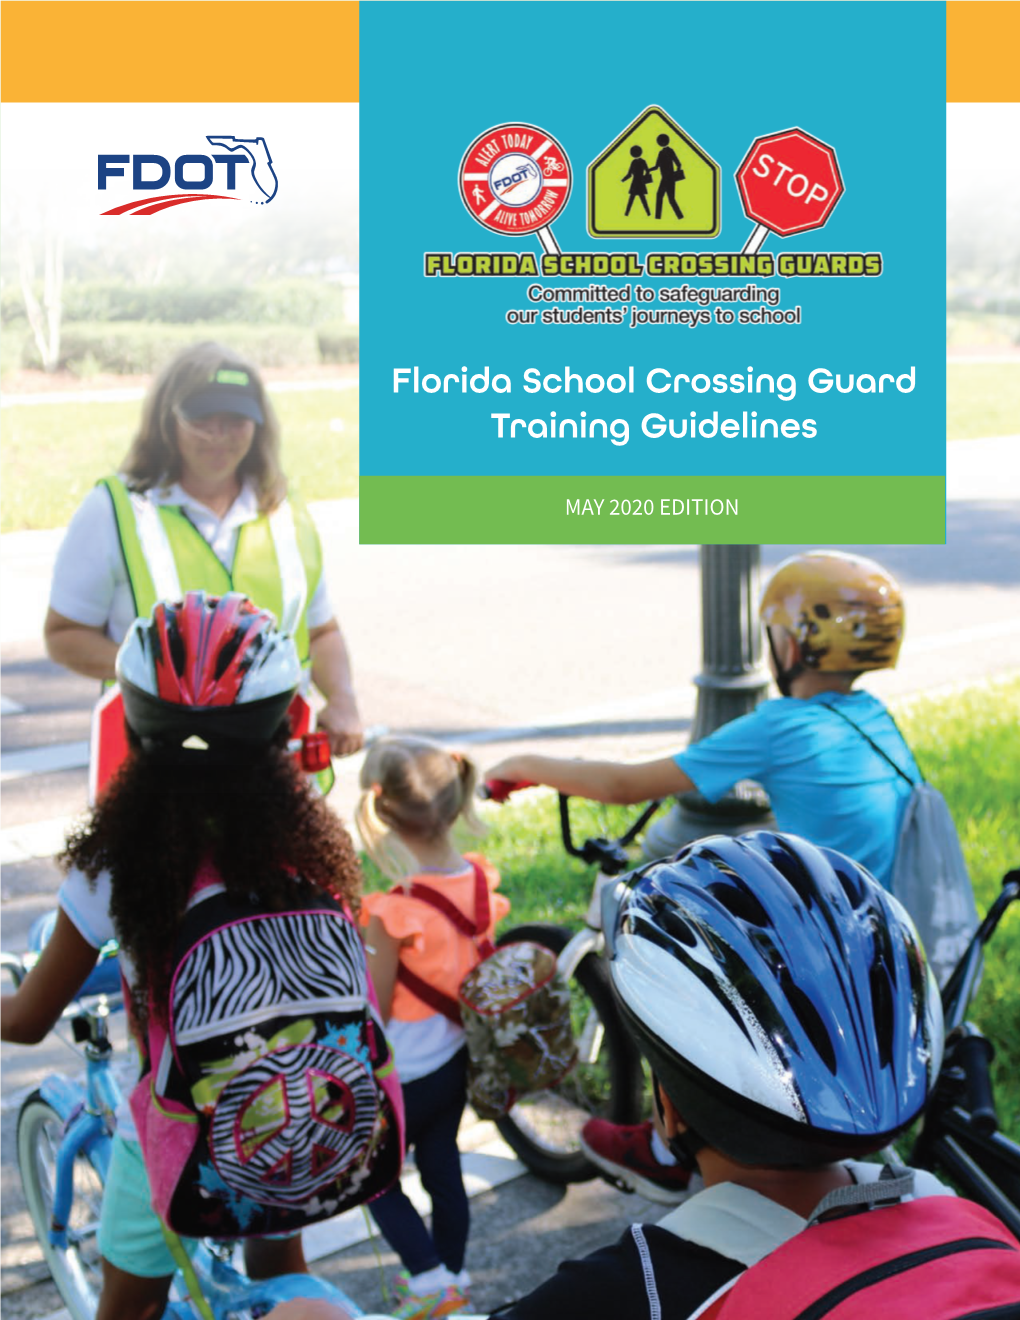 Florida School Crossing Guard Training Guidelines May 2020